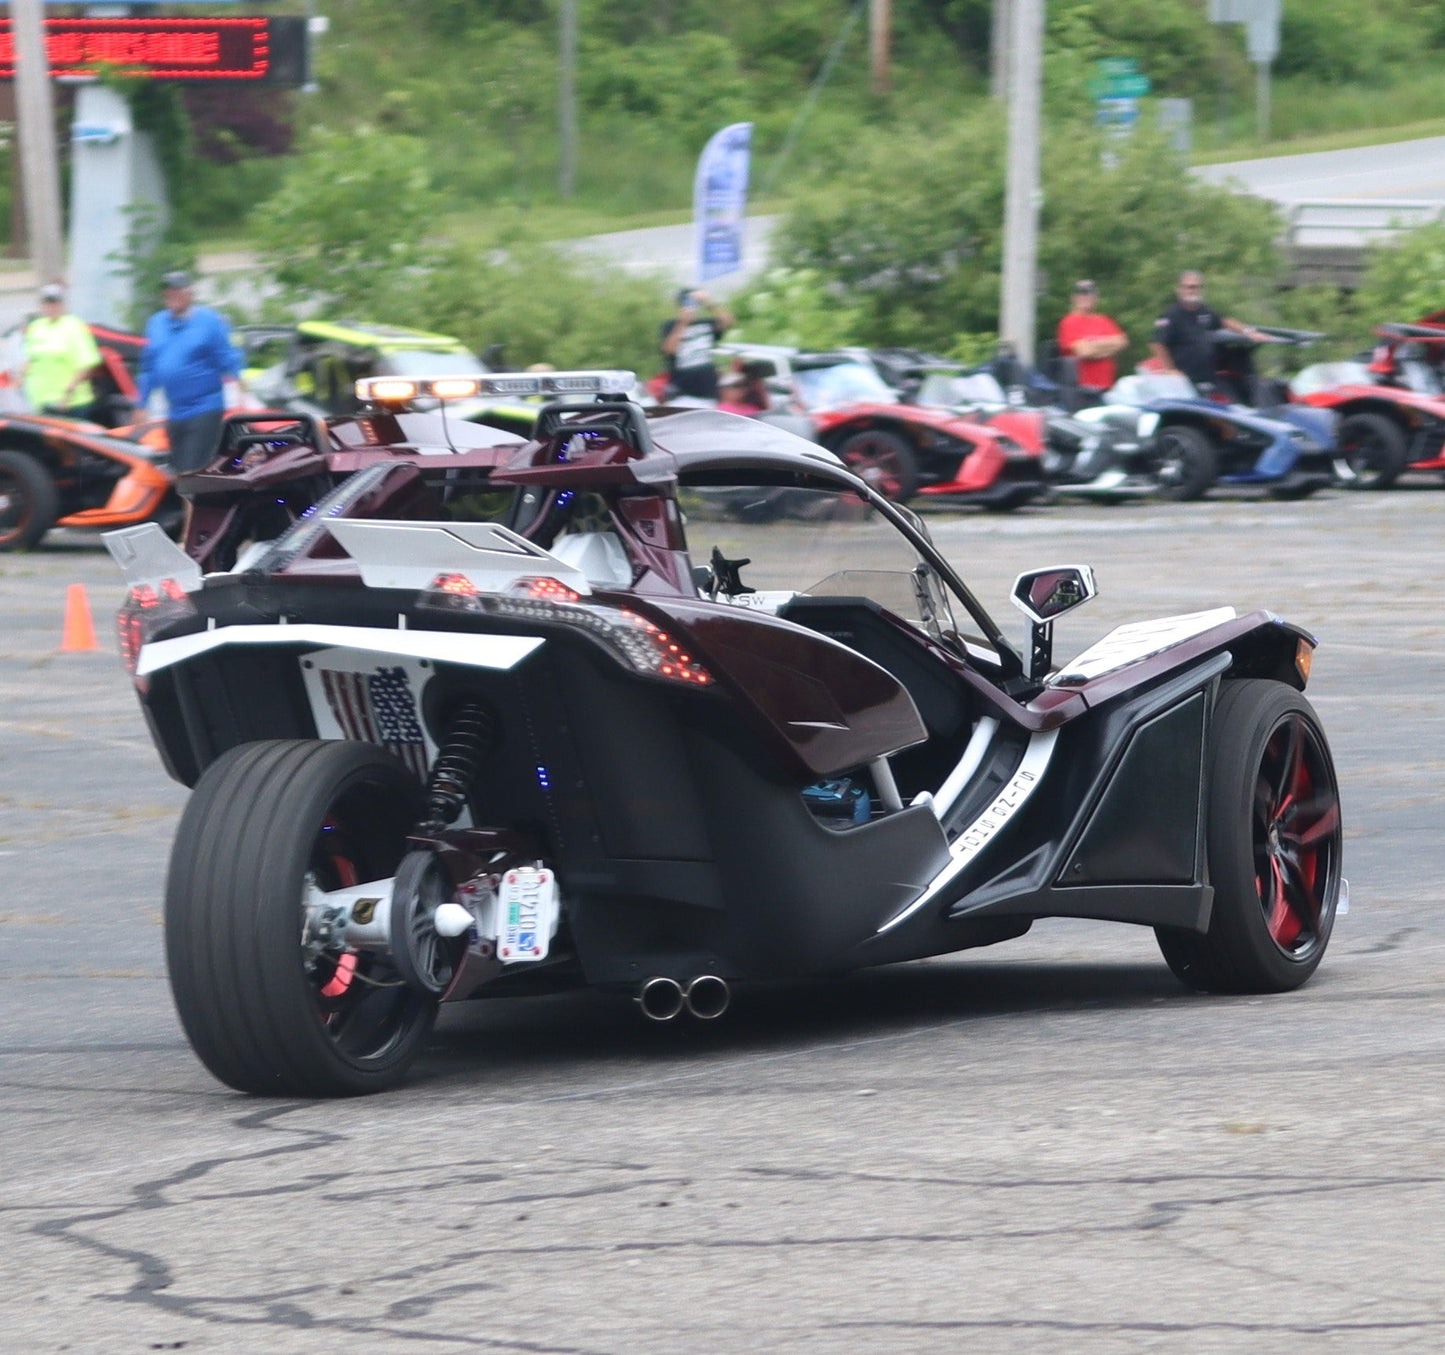 Slingshots in The Smokies 2024 – All Inclusive Platinum Package Registration